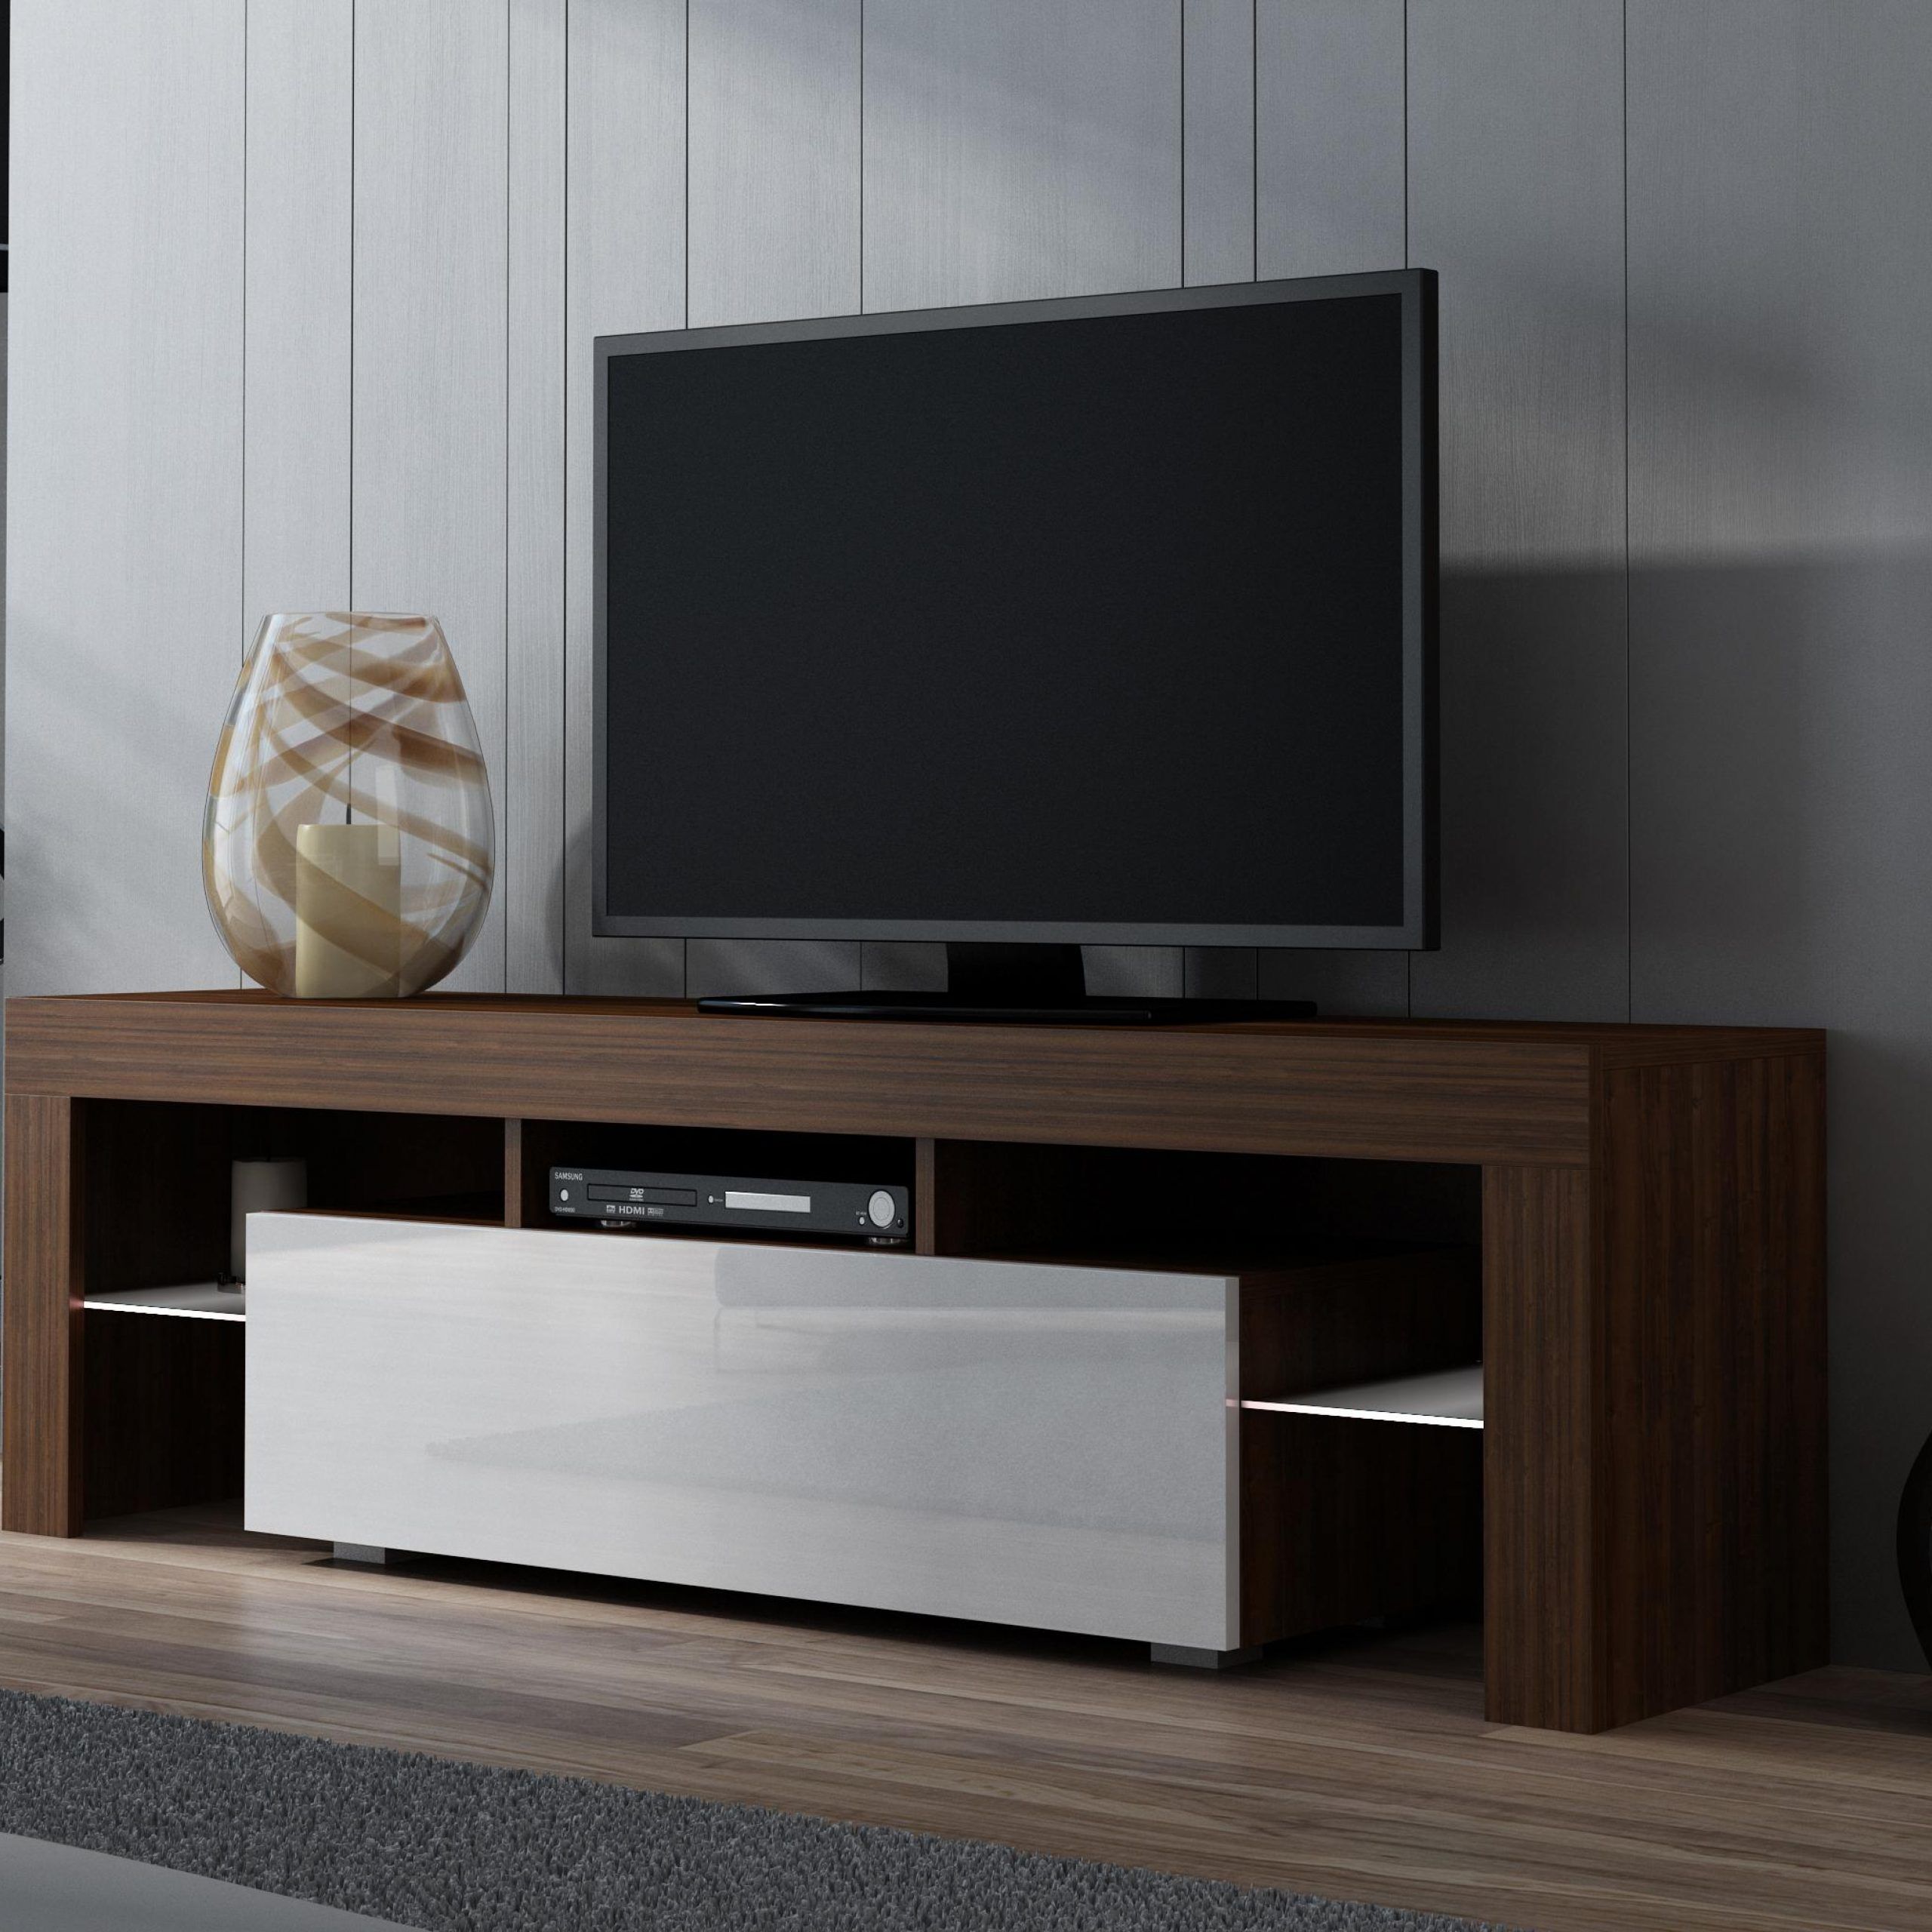 Milano 160 – Walnut Modern Tall Tv Stands For Flat Screens With Regard To Stylish Tv Stands (View 3 of 15)